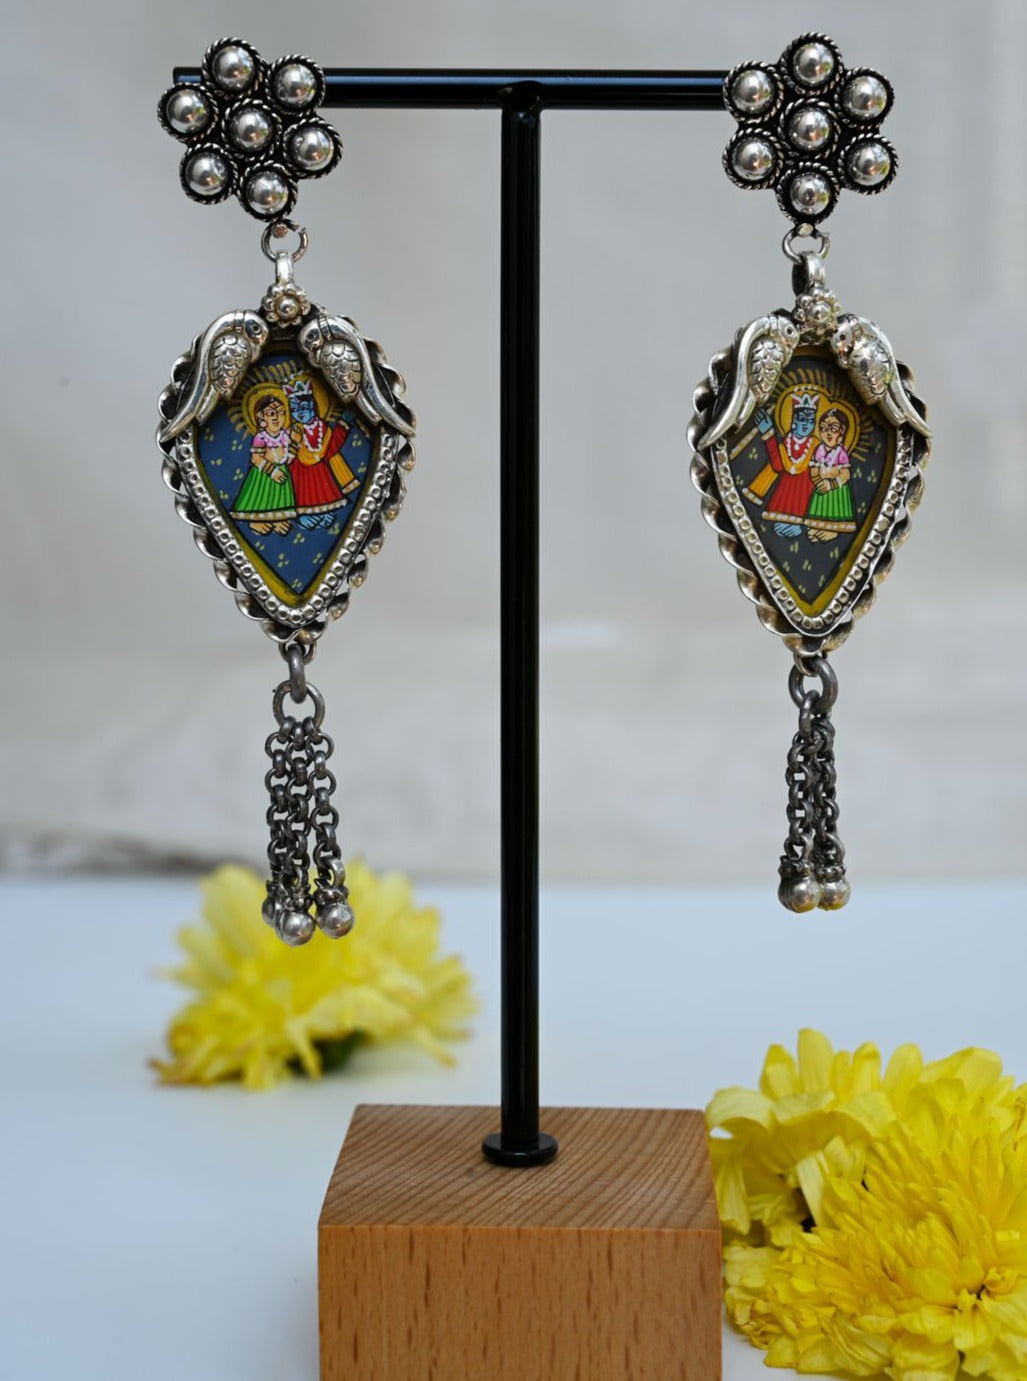 Handcrafted Silver Earrings with Hand Painting of Radha Krishna